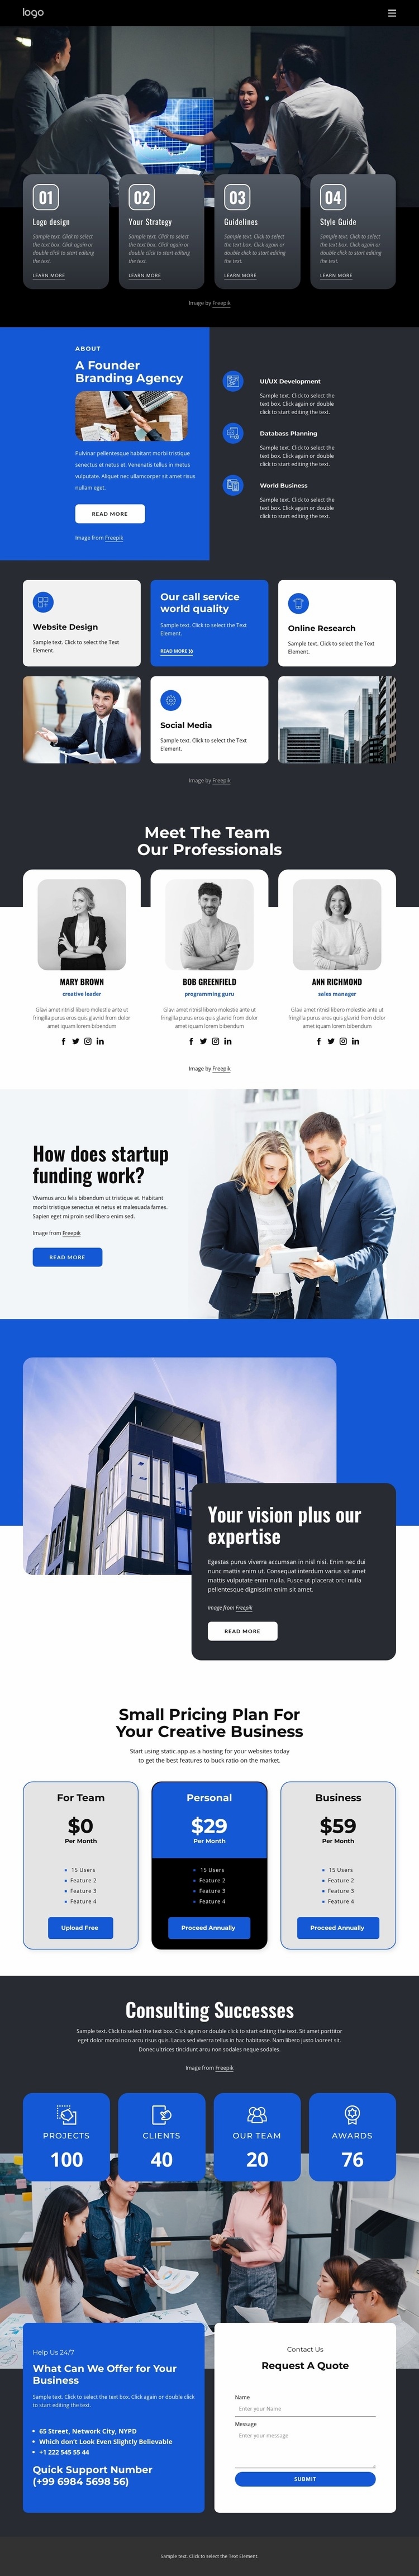 Business analytic Wix Template Alternative